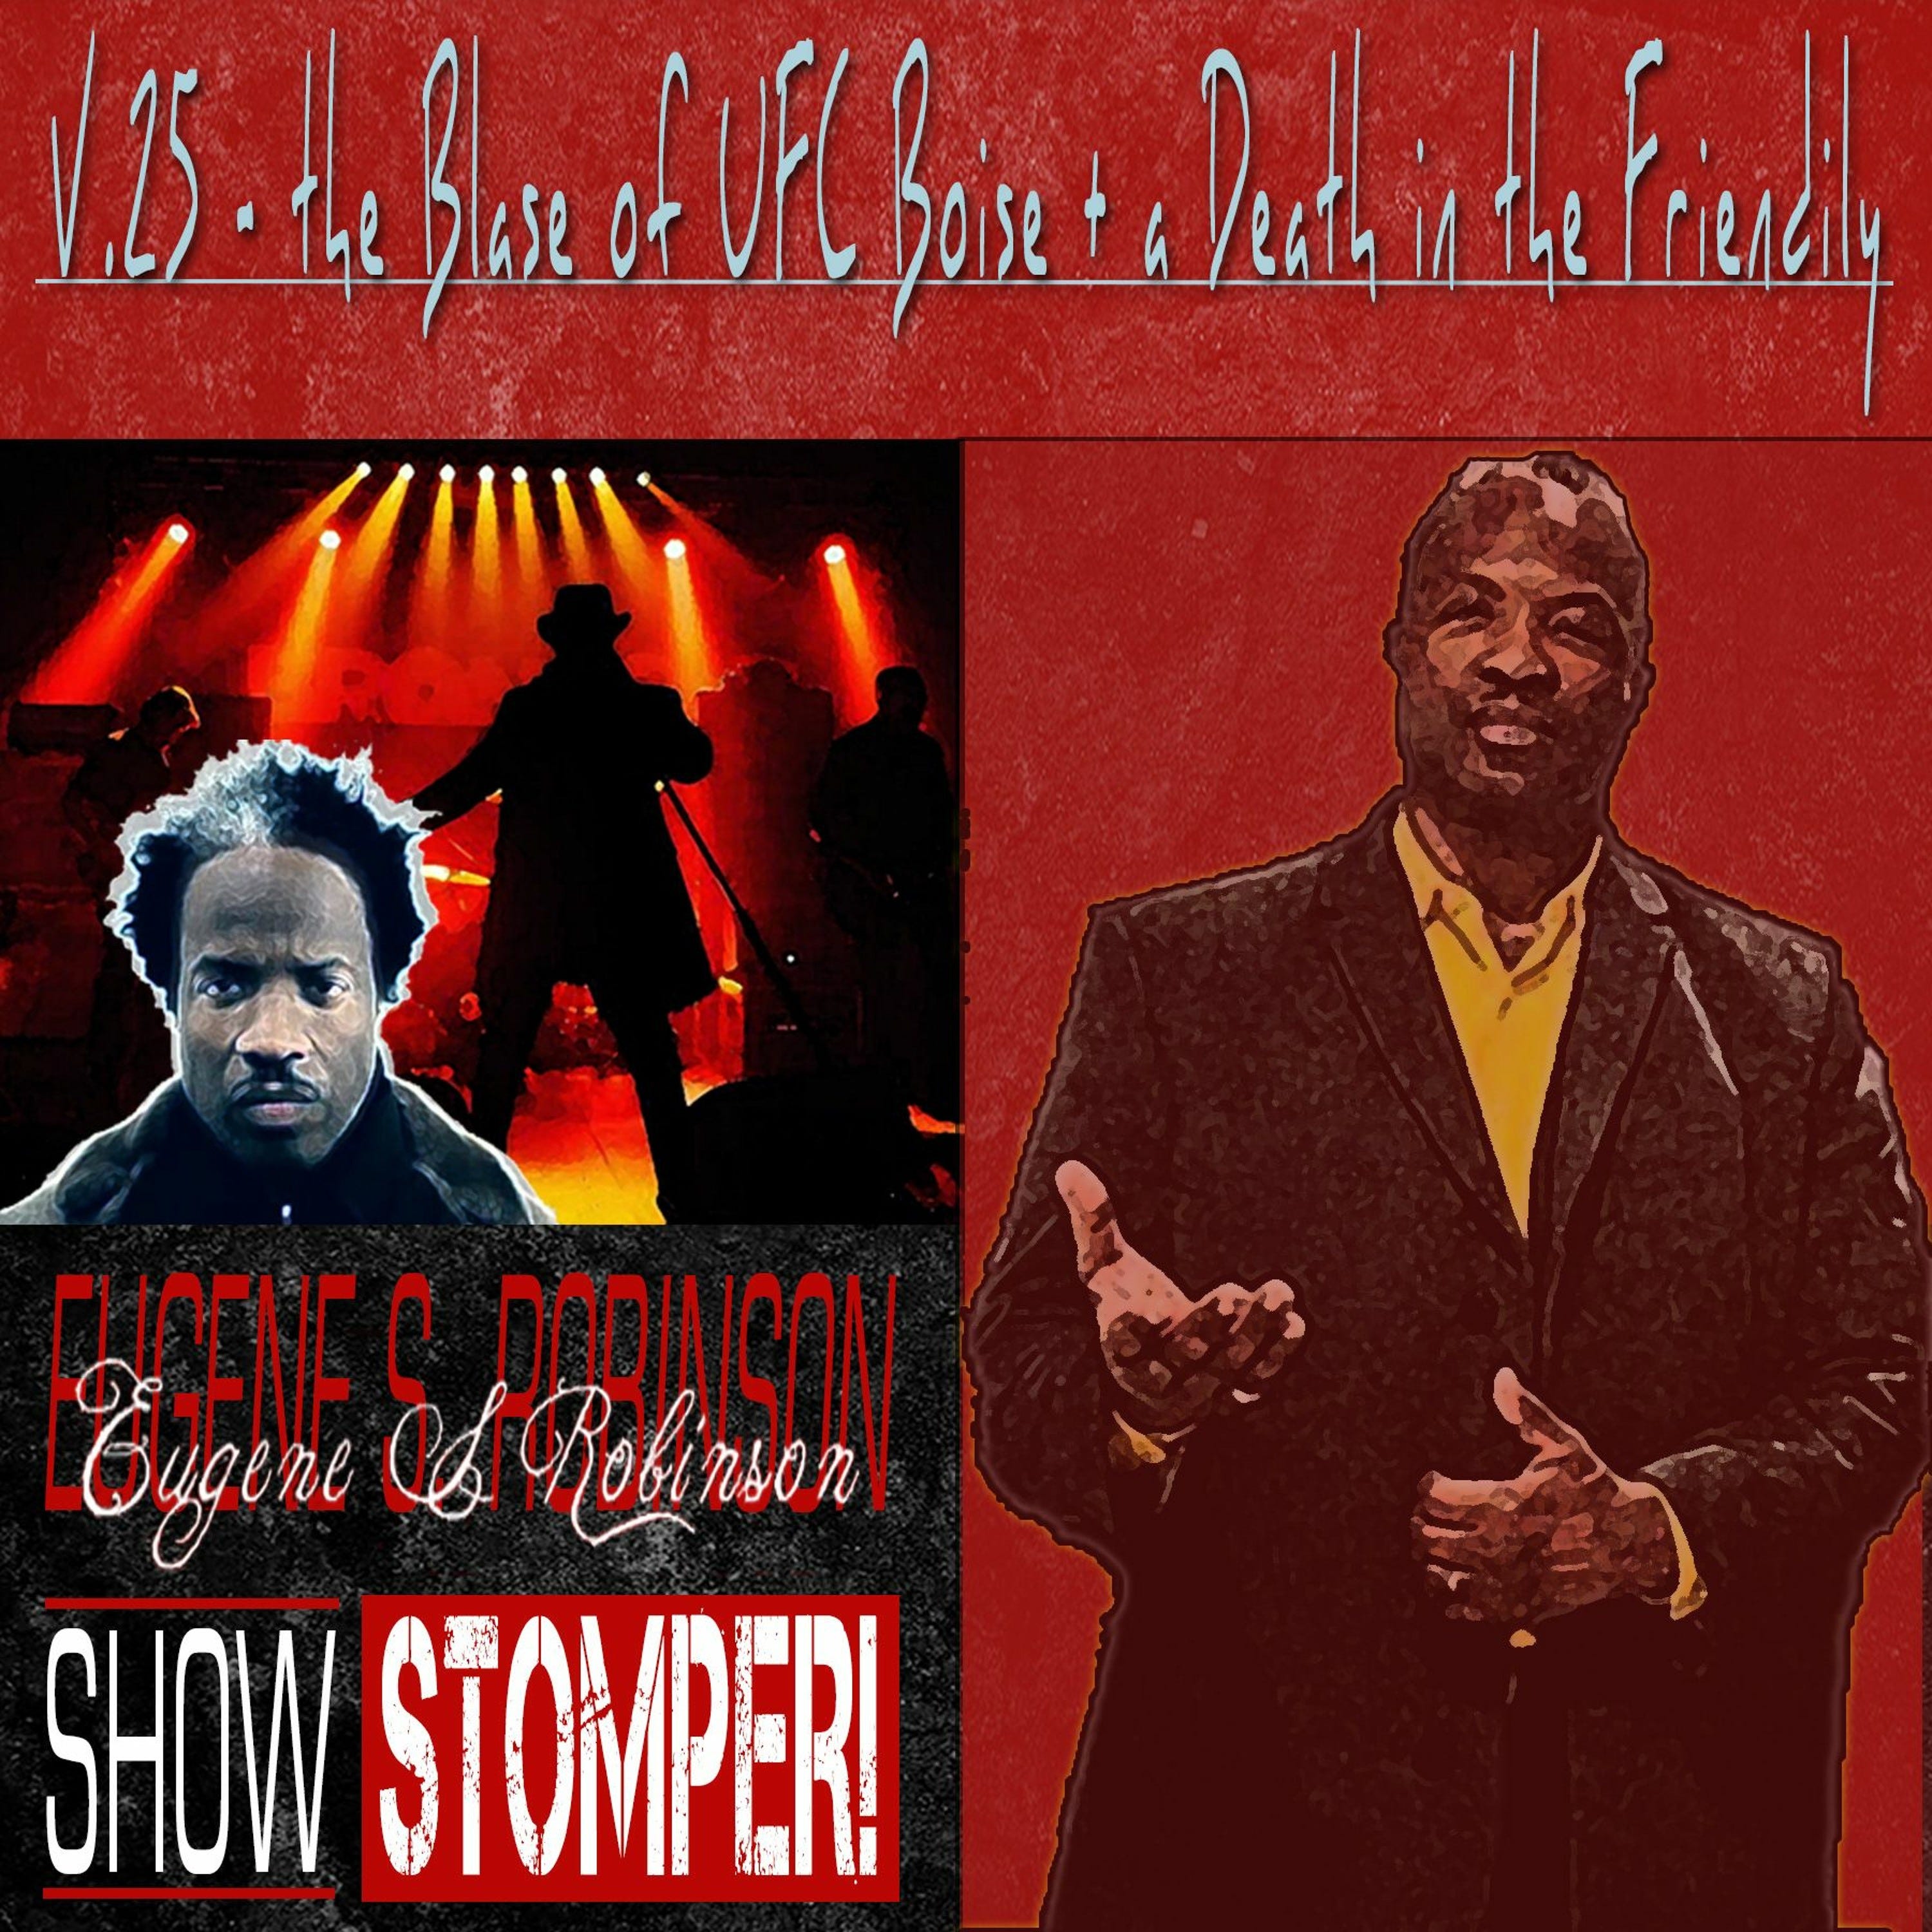 The Eugene S. Robinson Show Stomper! V.25 - The Blase Of UFC Boise + A Death In The Friendily